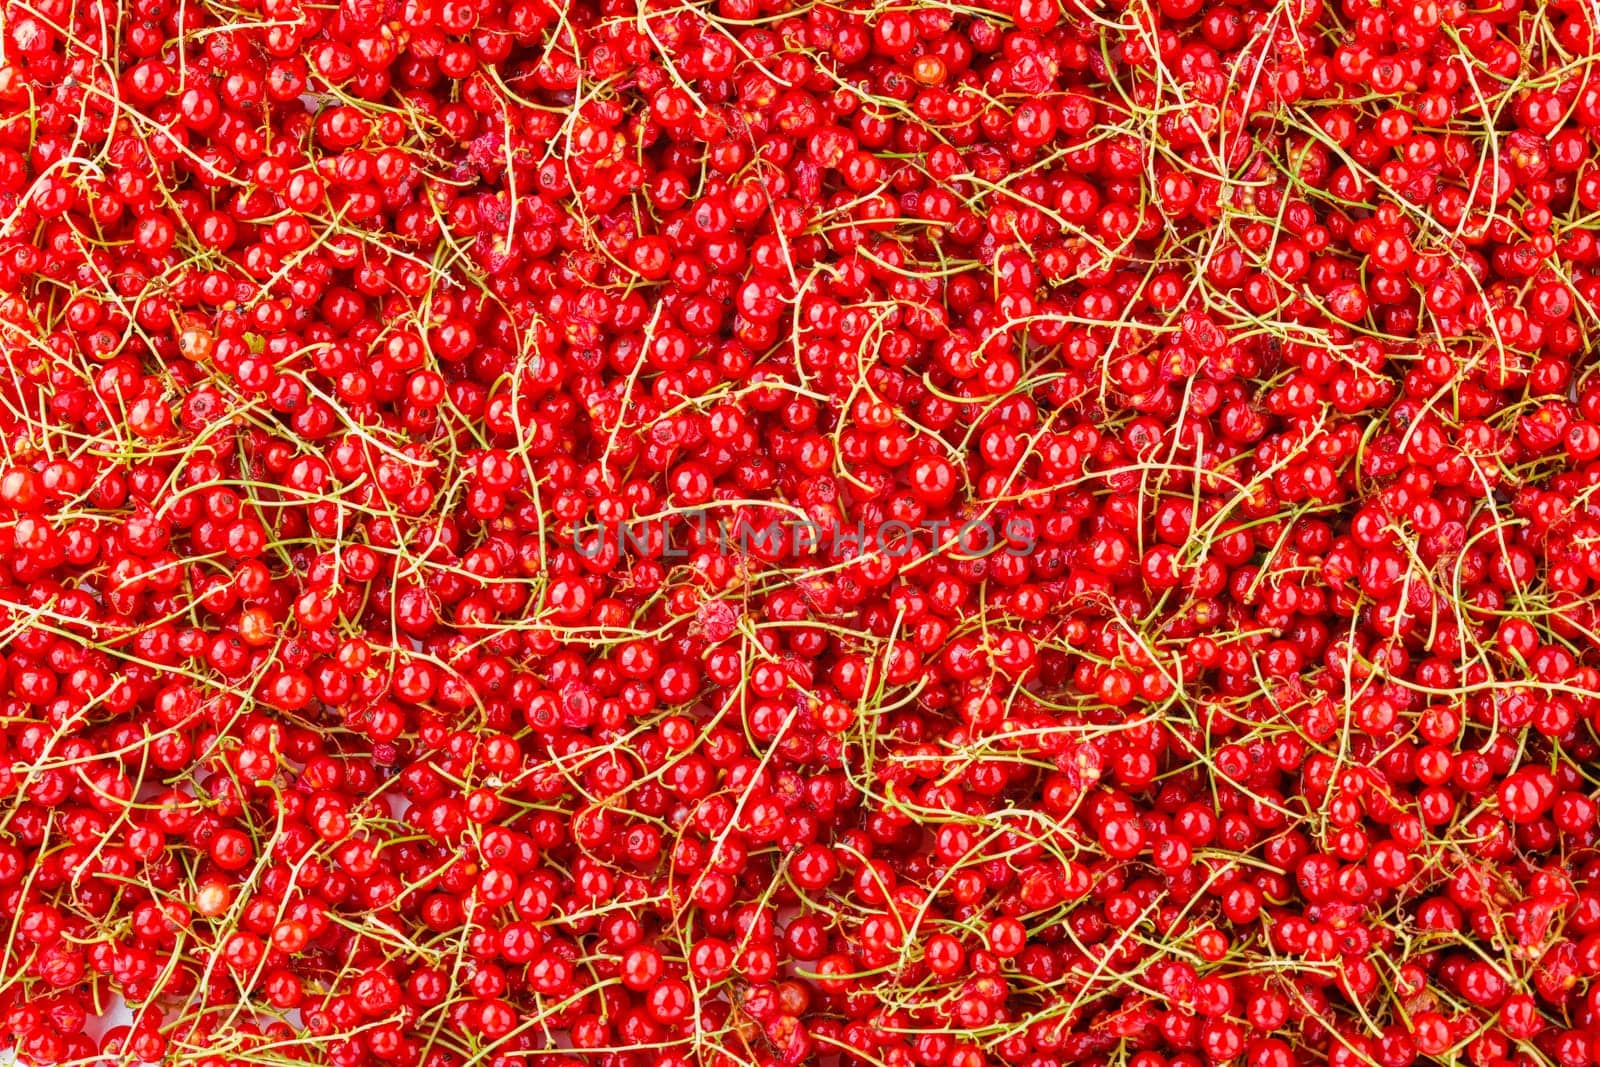 full-frame background and texture of red currants pile in high angle view.